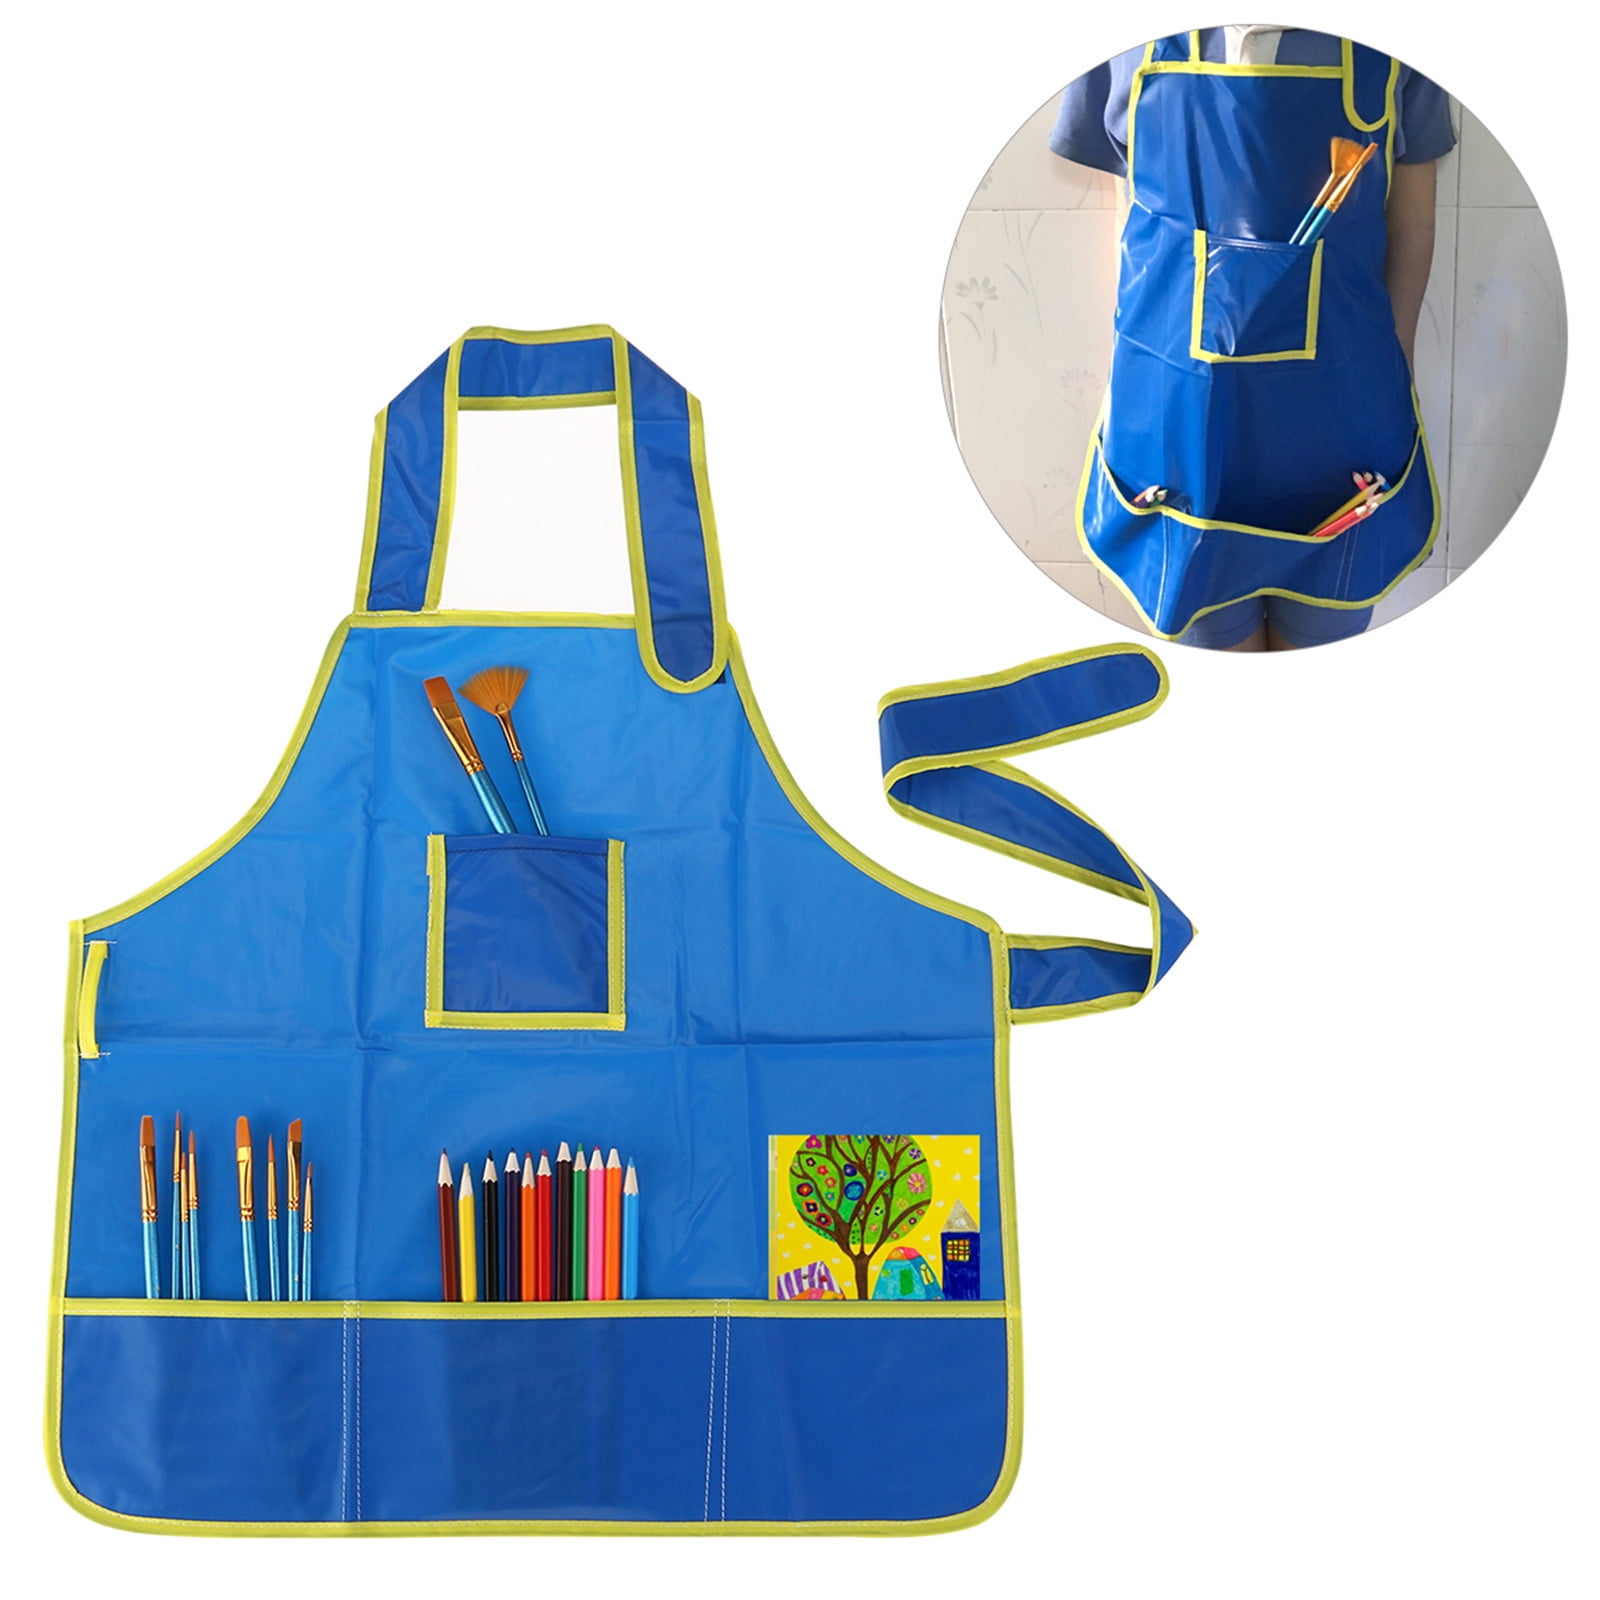 2 Pack Kids Art Smock Painting Apron Long Sleeve for Baking, Eating, Arts &  Crafts-Waterproof Paint Shirt for Children Ages 2-8 